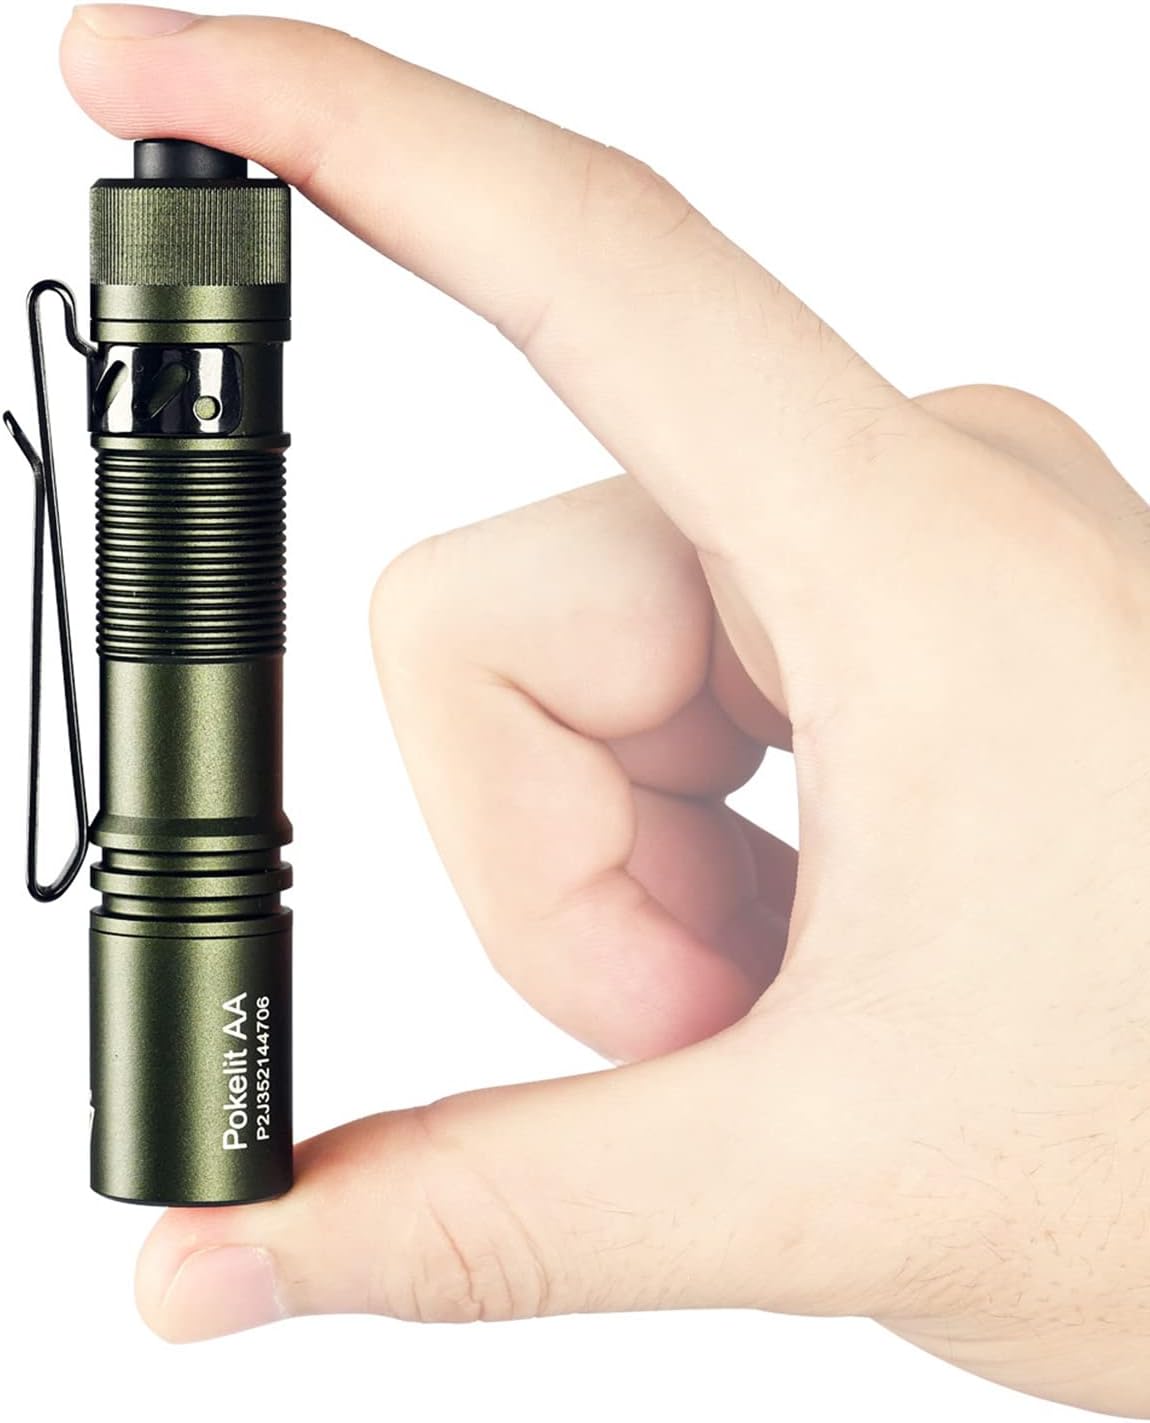 ACEBEAM Pokelit AA Rechargeable Mini Flashlight with Clip, 550 High Lumens Pocket EDC, Super Bright Small Flashlight, 90+ High CRI Led for Camping,Hiking,Everyday Use(Dark Green)